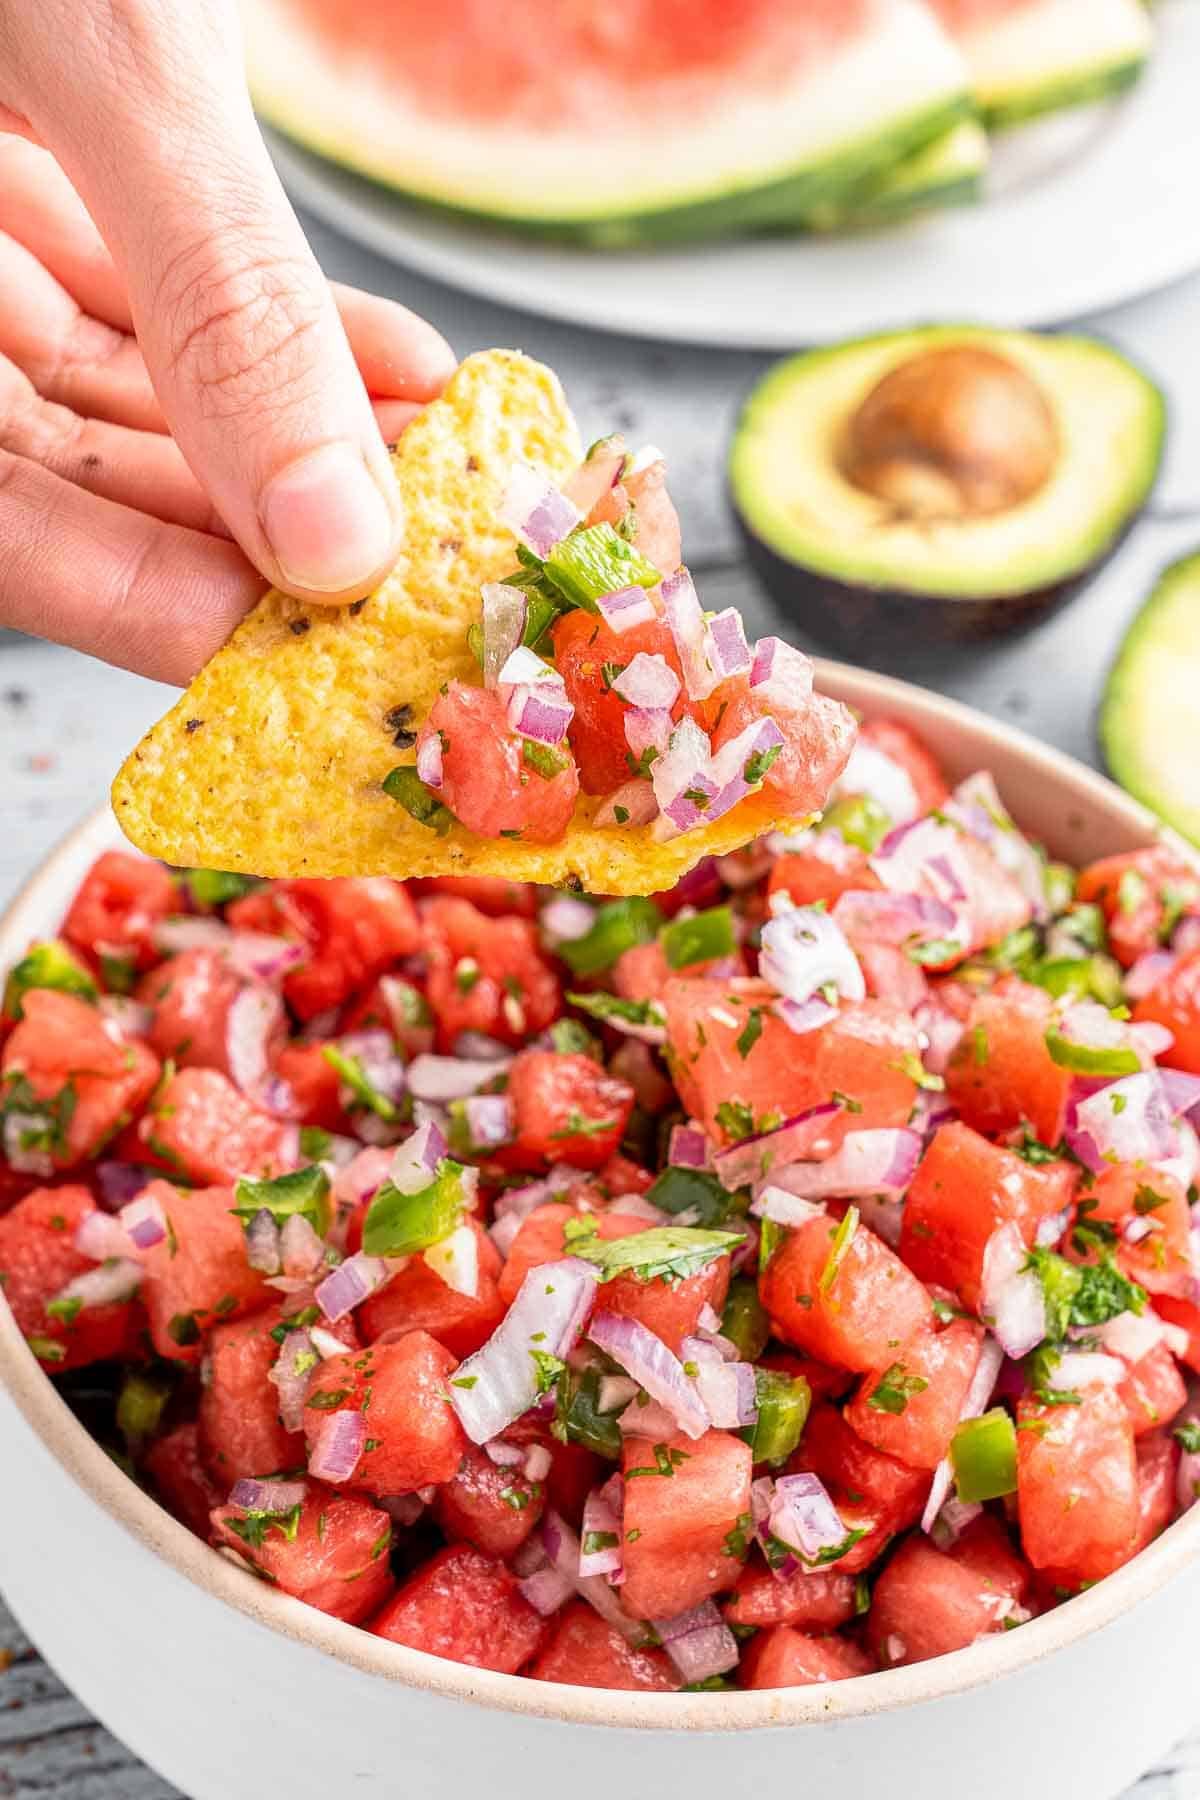 Tortilla chip scooping watermelon salsa out of white bowl.